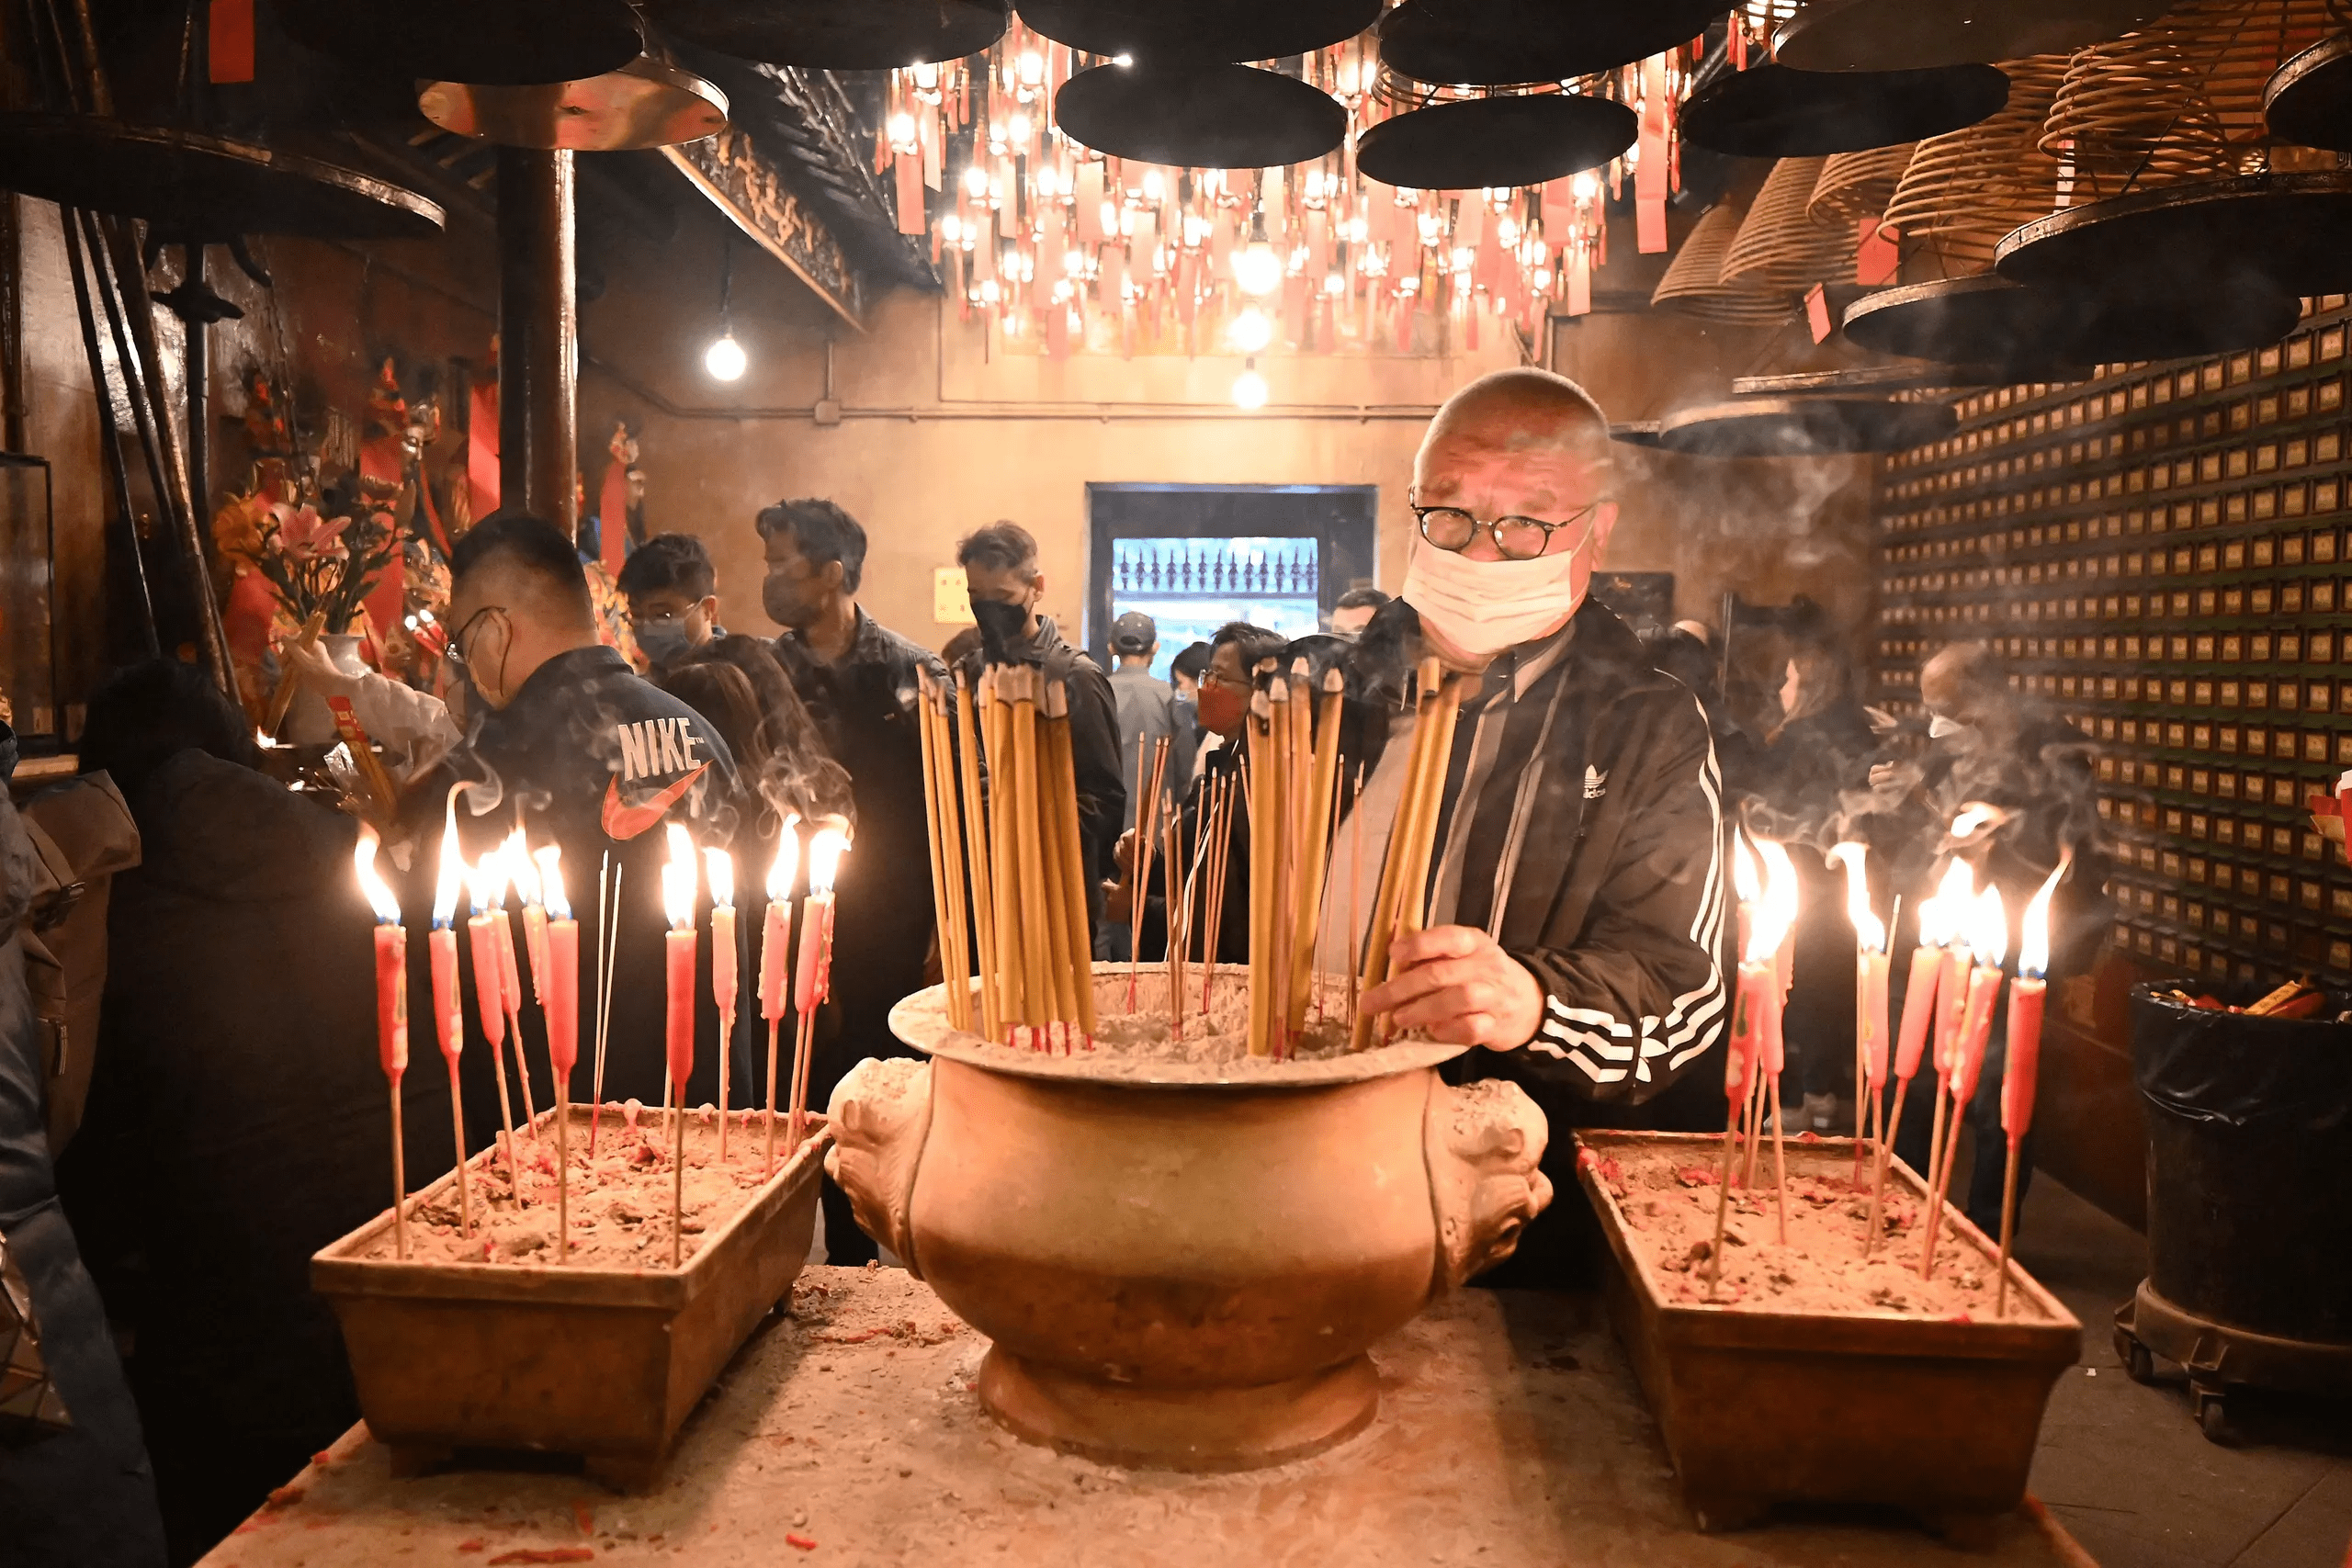 Villagers prepare more than 50,000 sticks per day during the New Year Celebration.